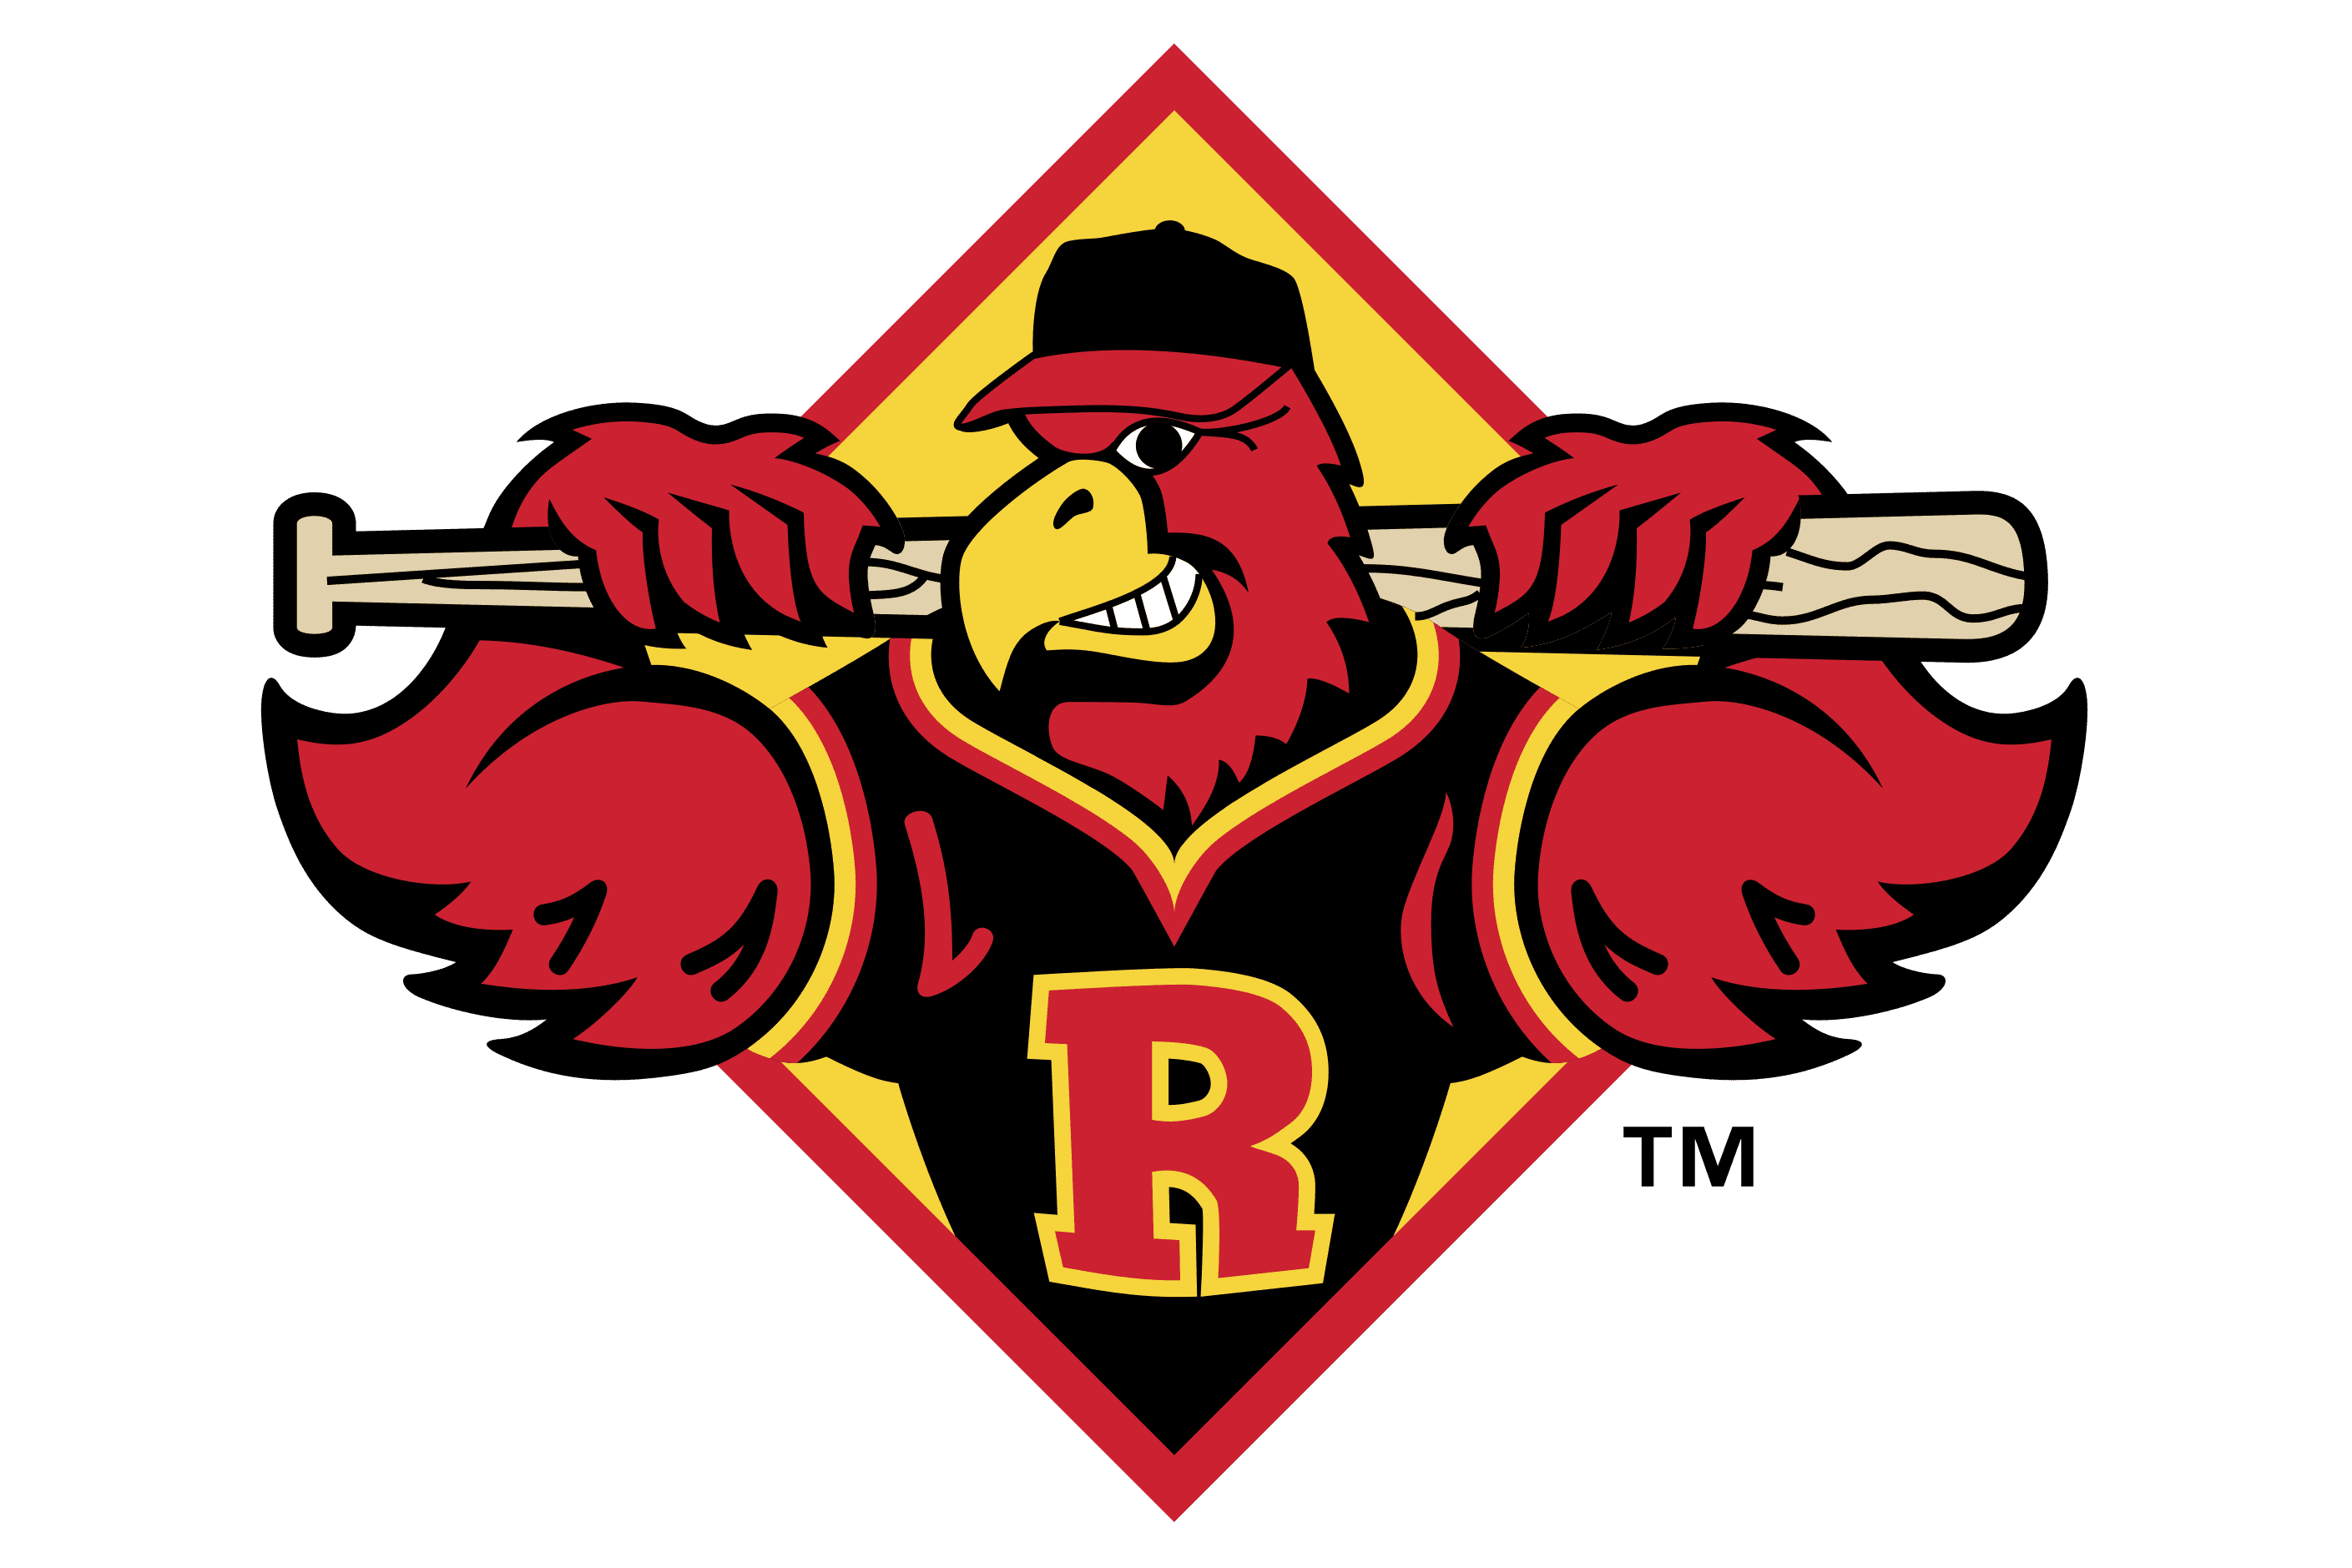 ROCHESTER RED WINGS Novelty Baseball Autographed by Mascot SPIKES